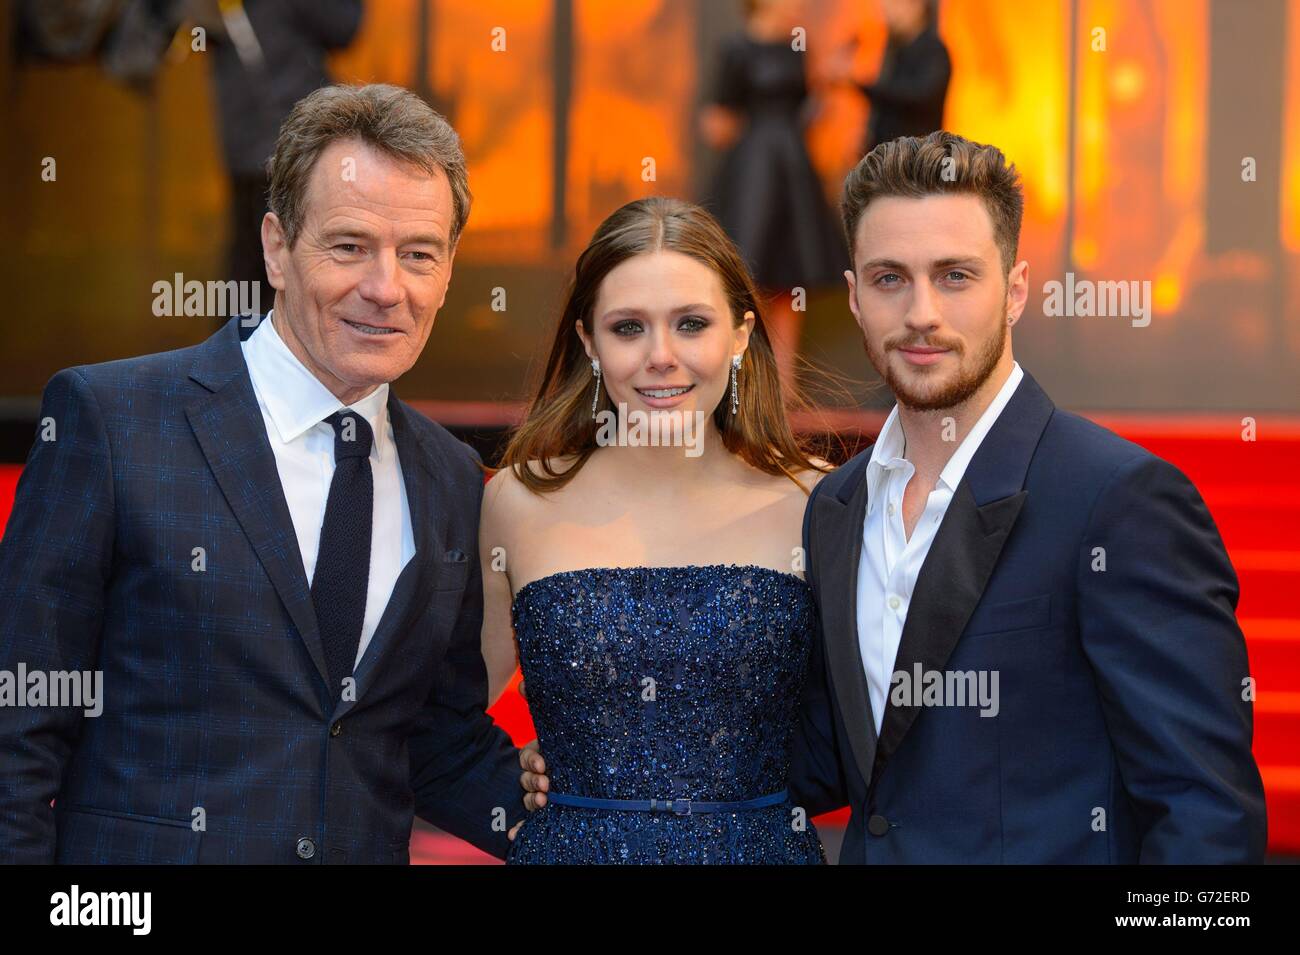 Bryan Cranston, Elizabeth Olsen and Aaron Taylor-Johnson arriving at the European premiere of Godzilla, at the Odeon Leicester Square, central London. Stock Photo